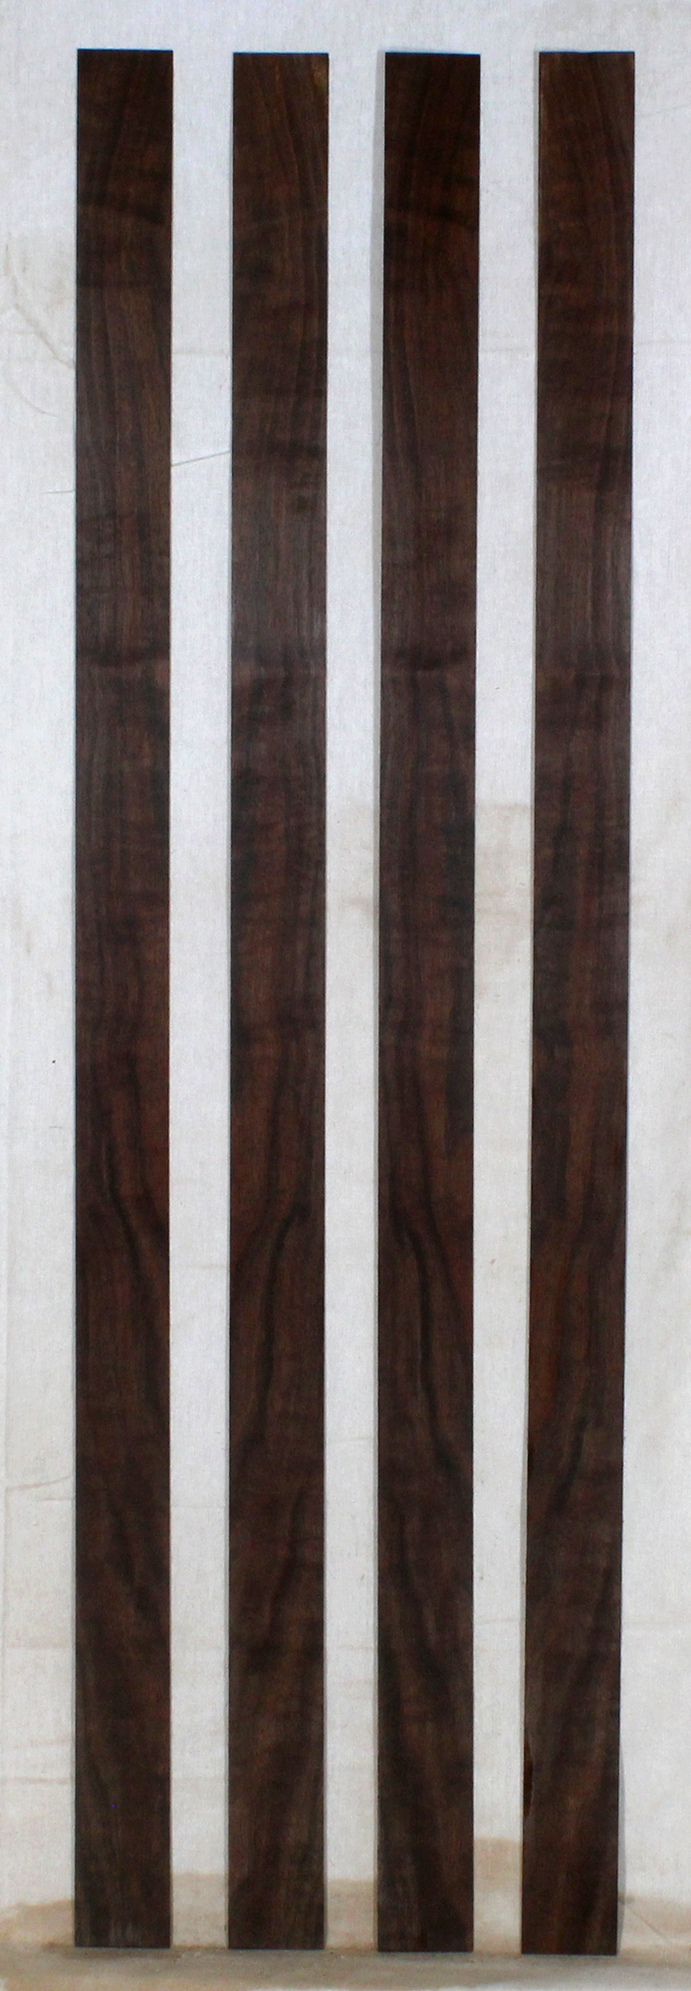 High Quality Bow Wood For Bow Making Wood From The West Wood From